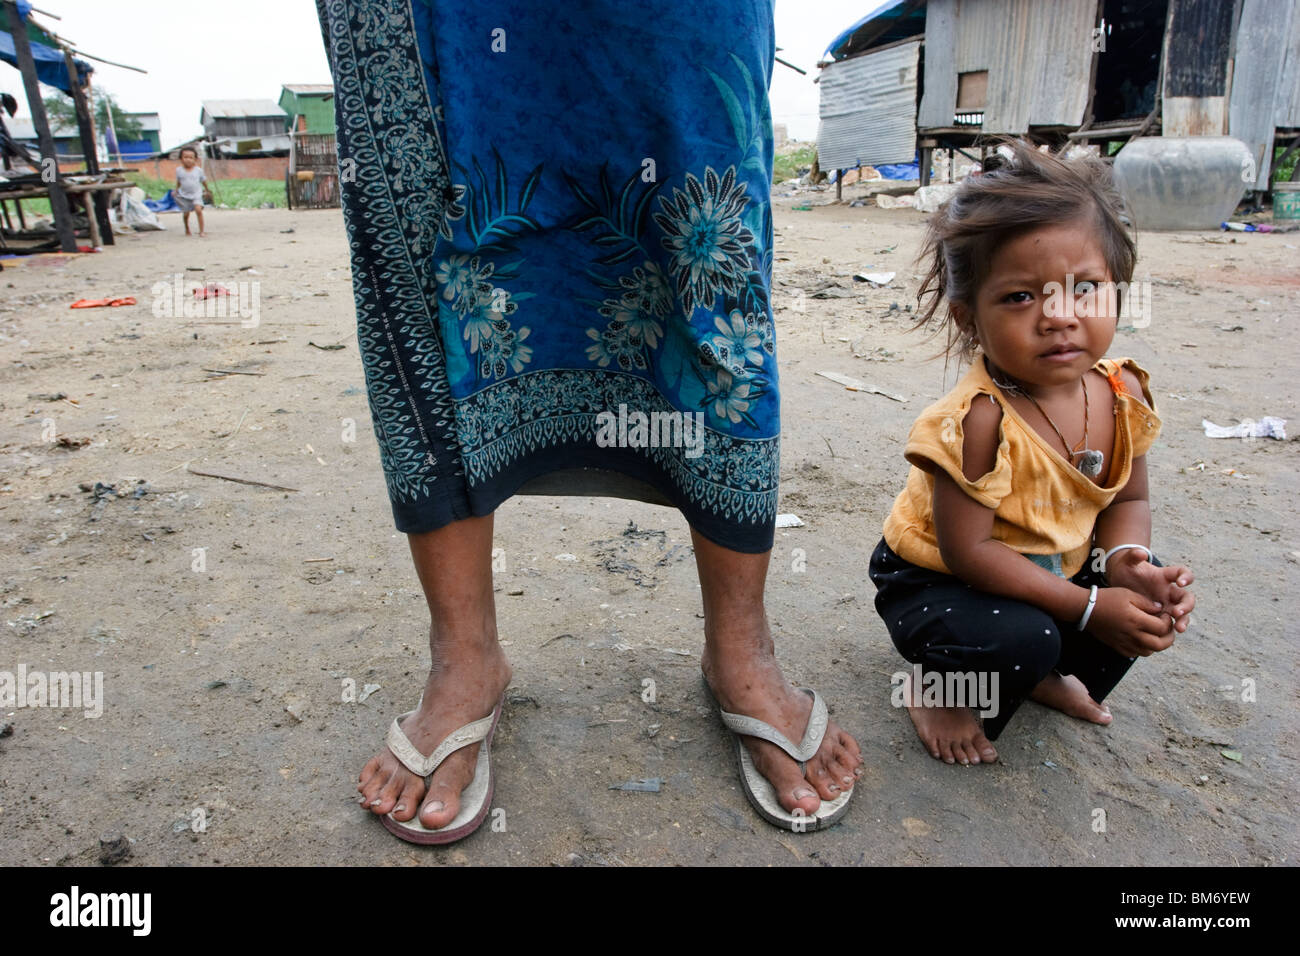 a young girl in the slum surrounding the garbage dump in Phnom Penh, Cambodia. Stock Photo